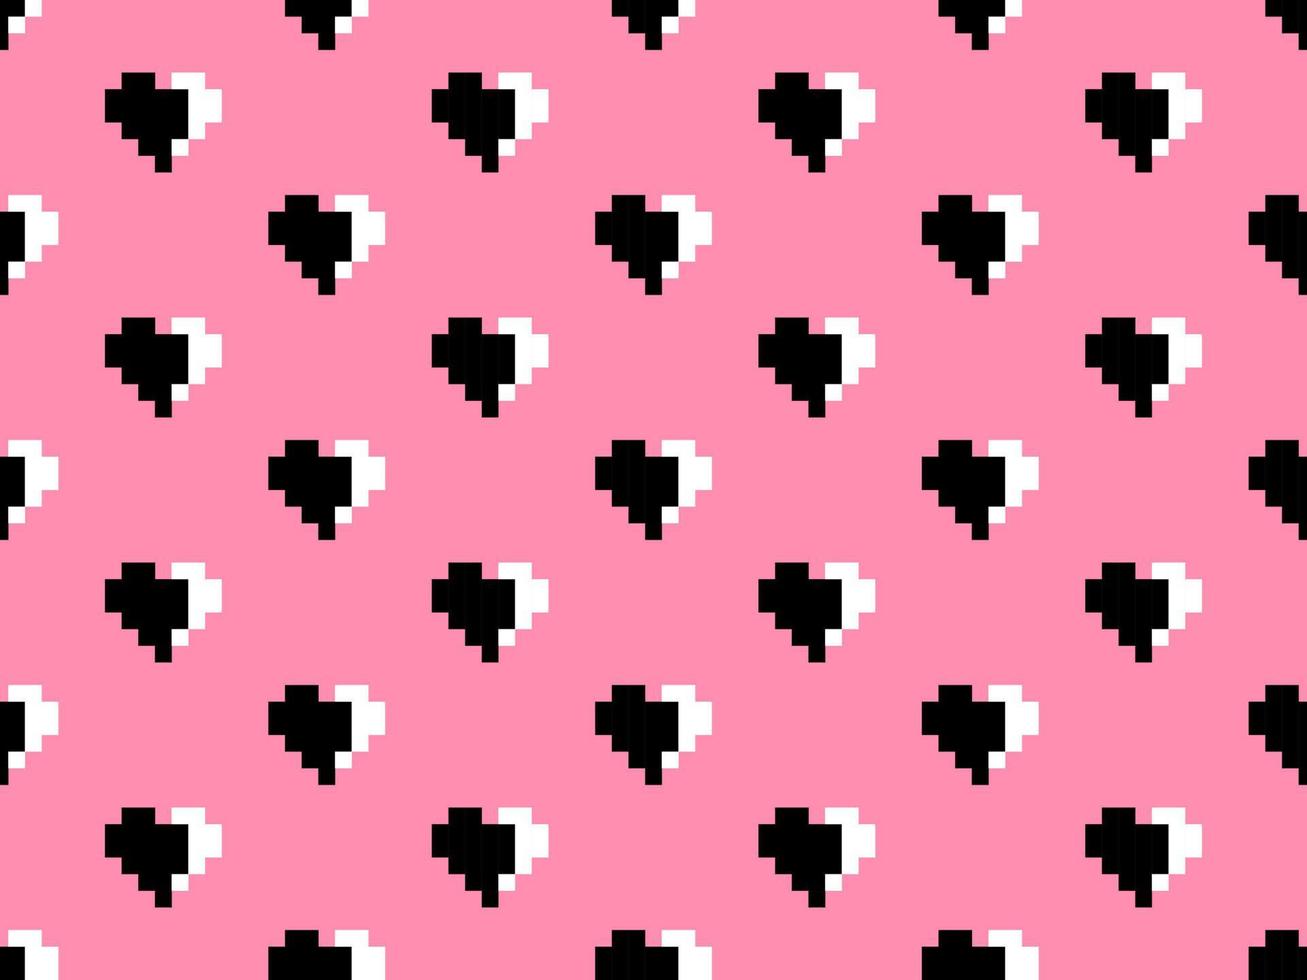 Heart cartoon character seamless pattern on pink background vector